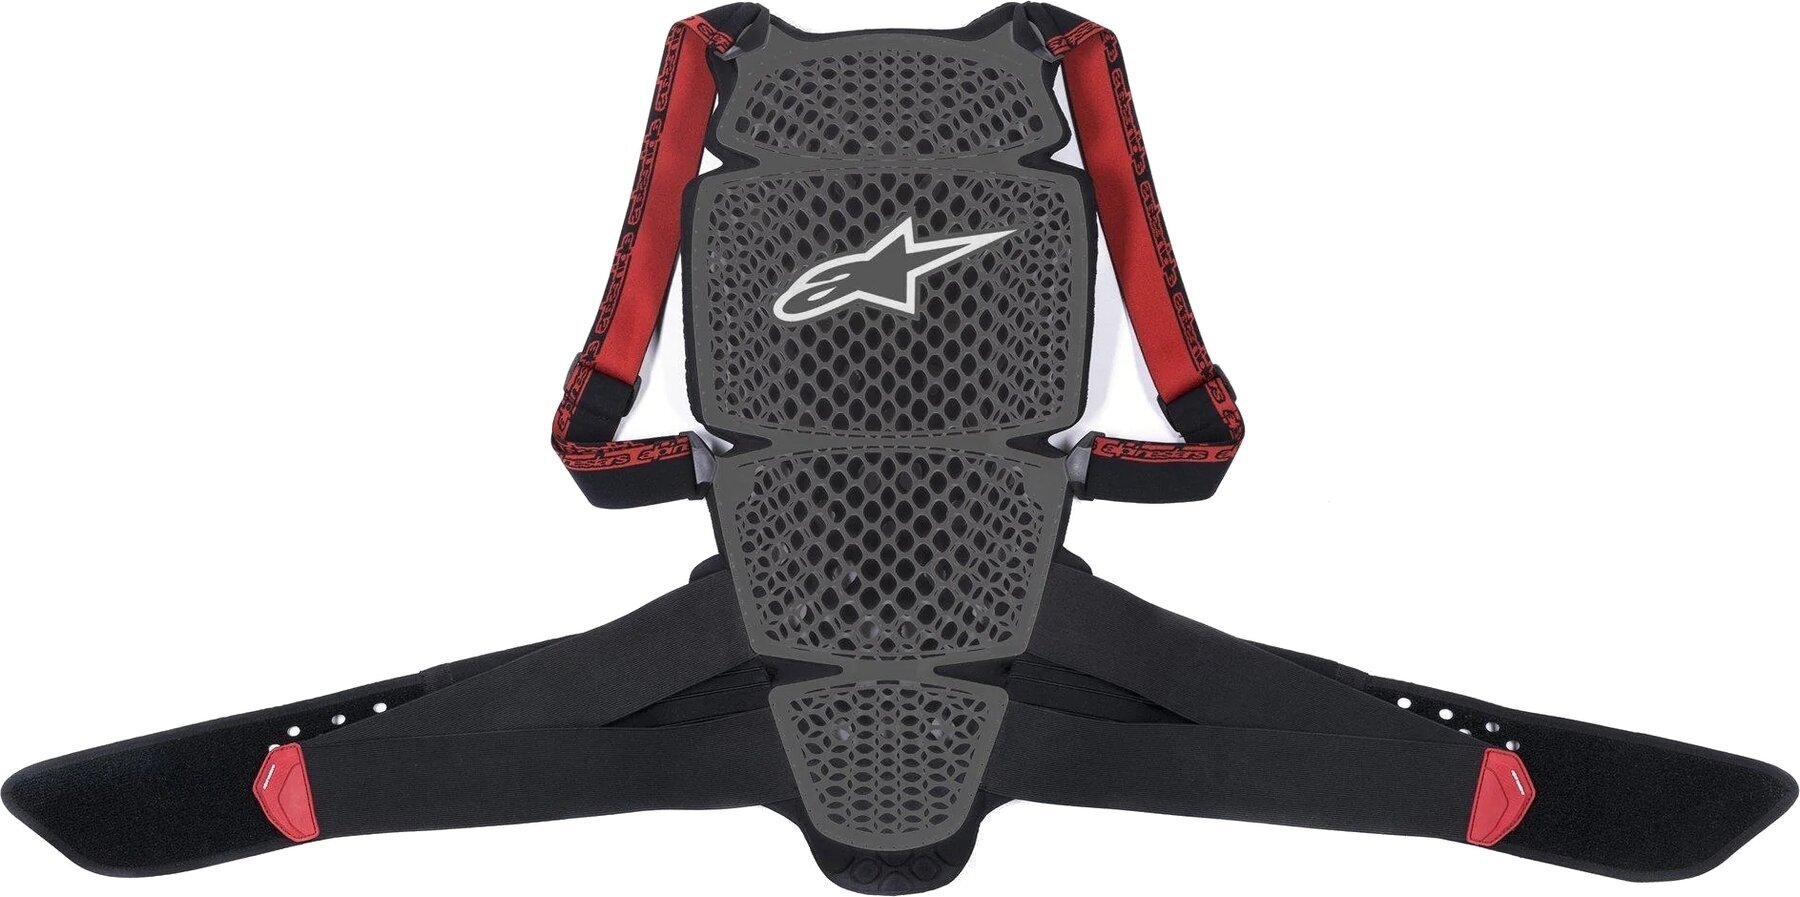 Protector spate Alpinestars Protector spate Nucleon KR-Cell Smoke Black/Red L